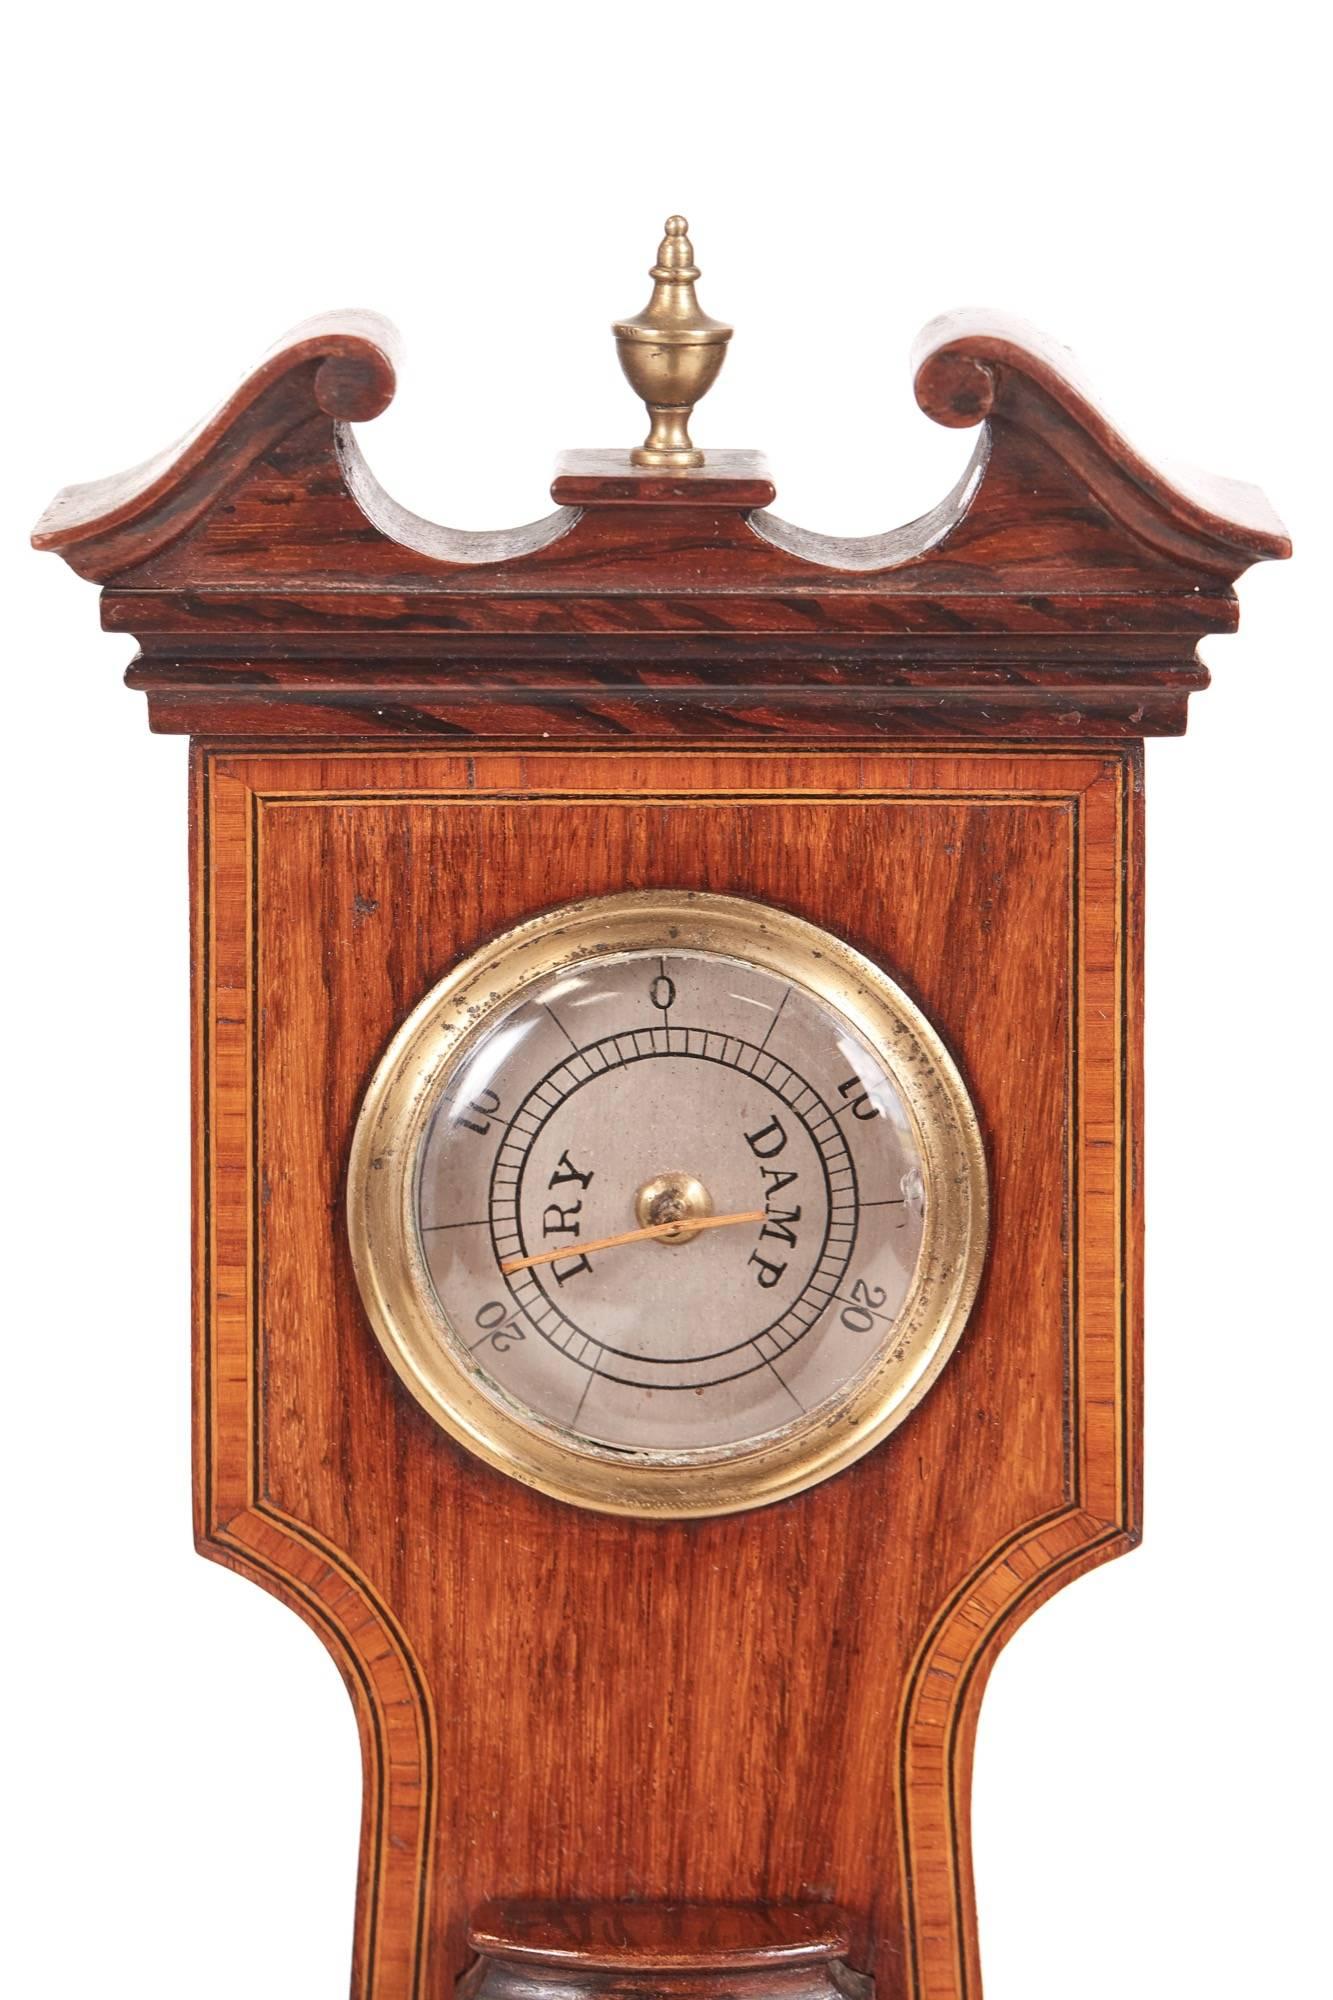 Edwardian crossbanded mahogany aneroid banjo barometer having a six inch silvered dial with and long thermometer and hygrometer above spirit level below
Lovely color and condition
Working order
Measures: 9